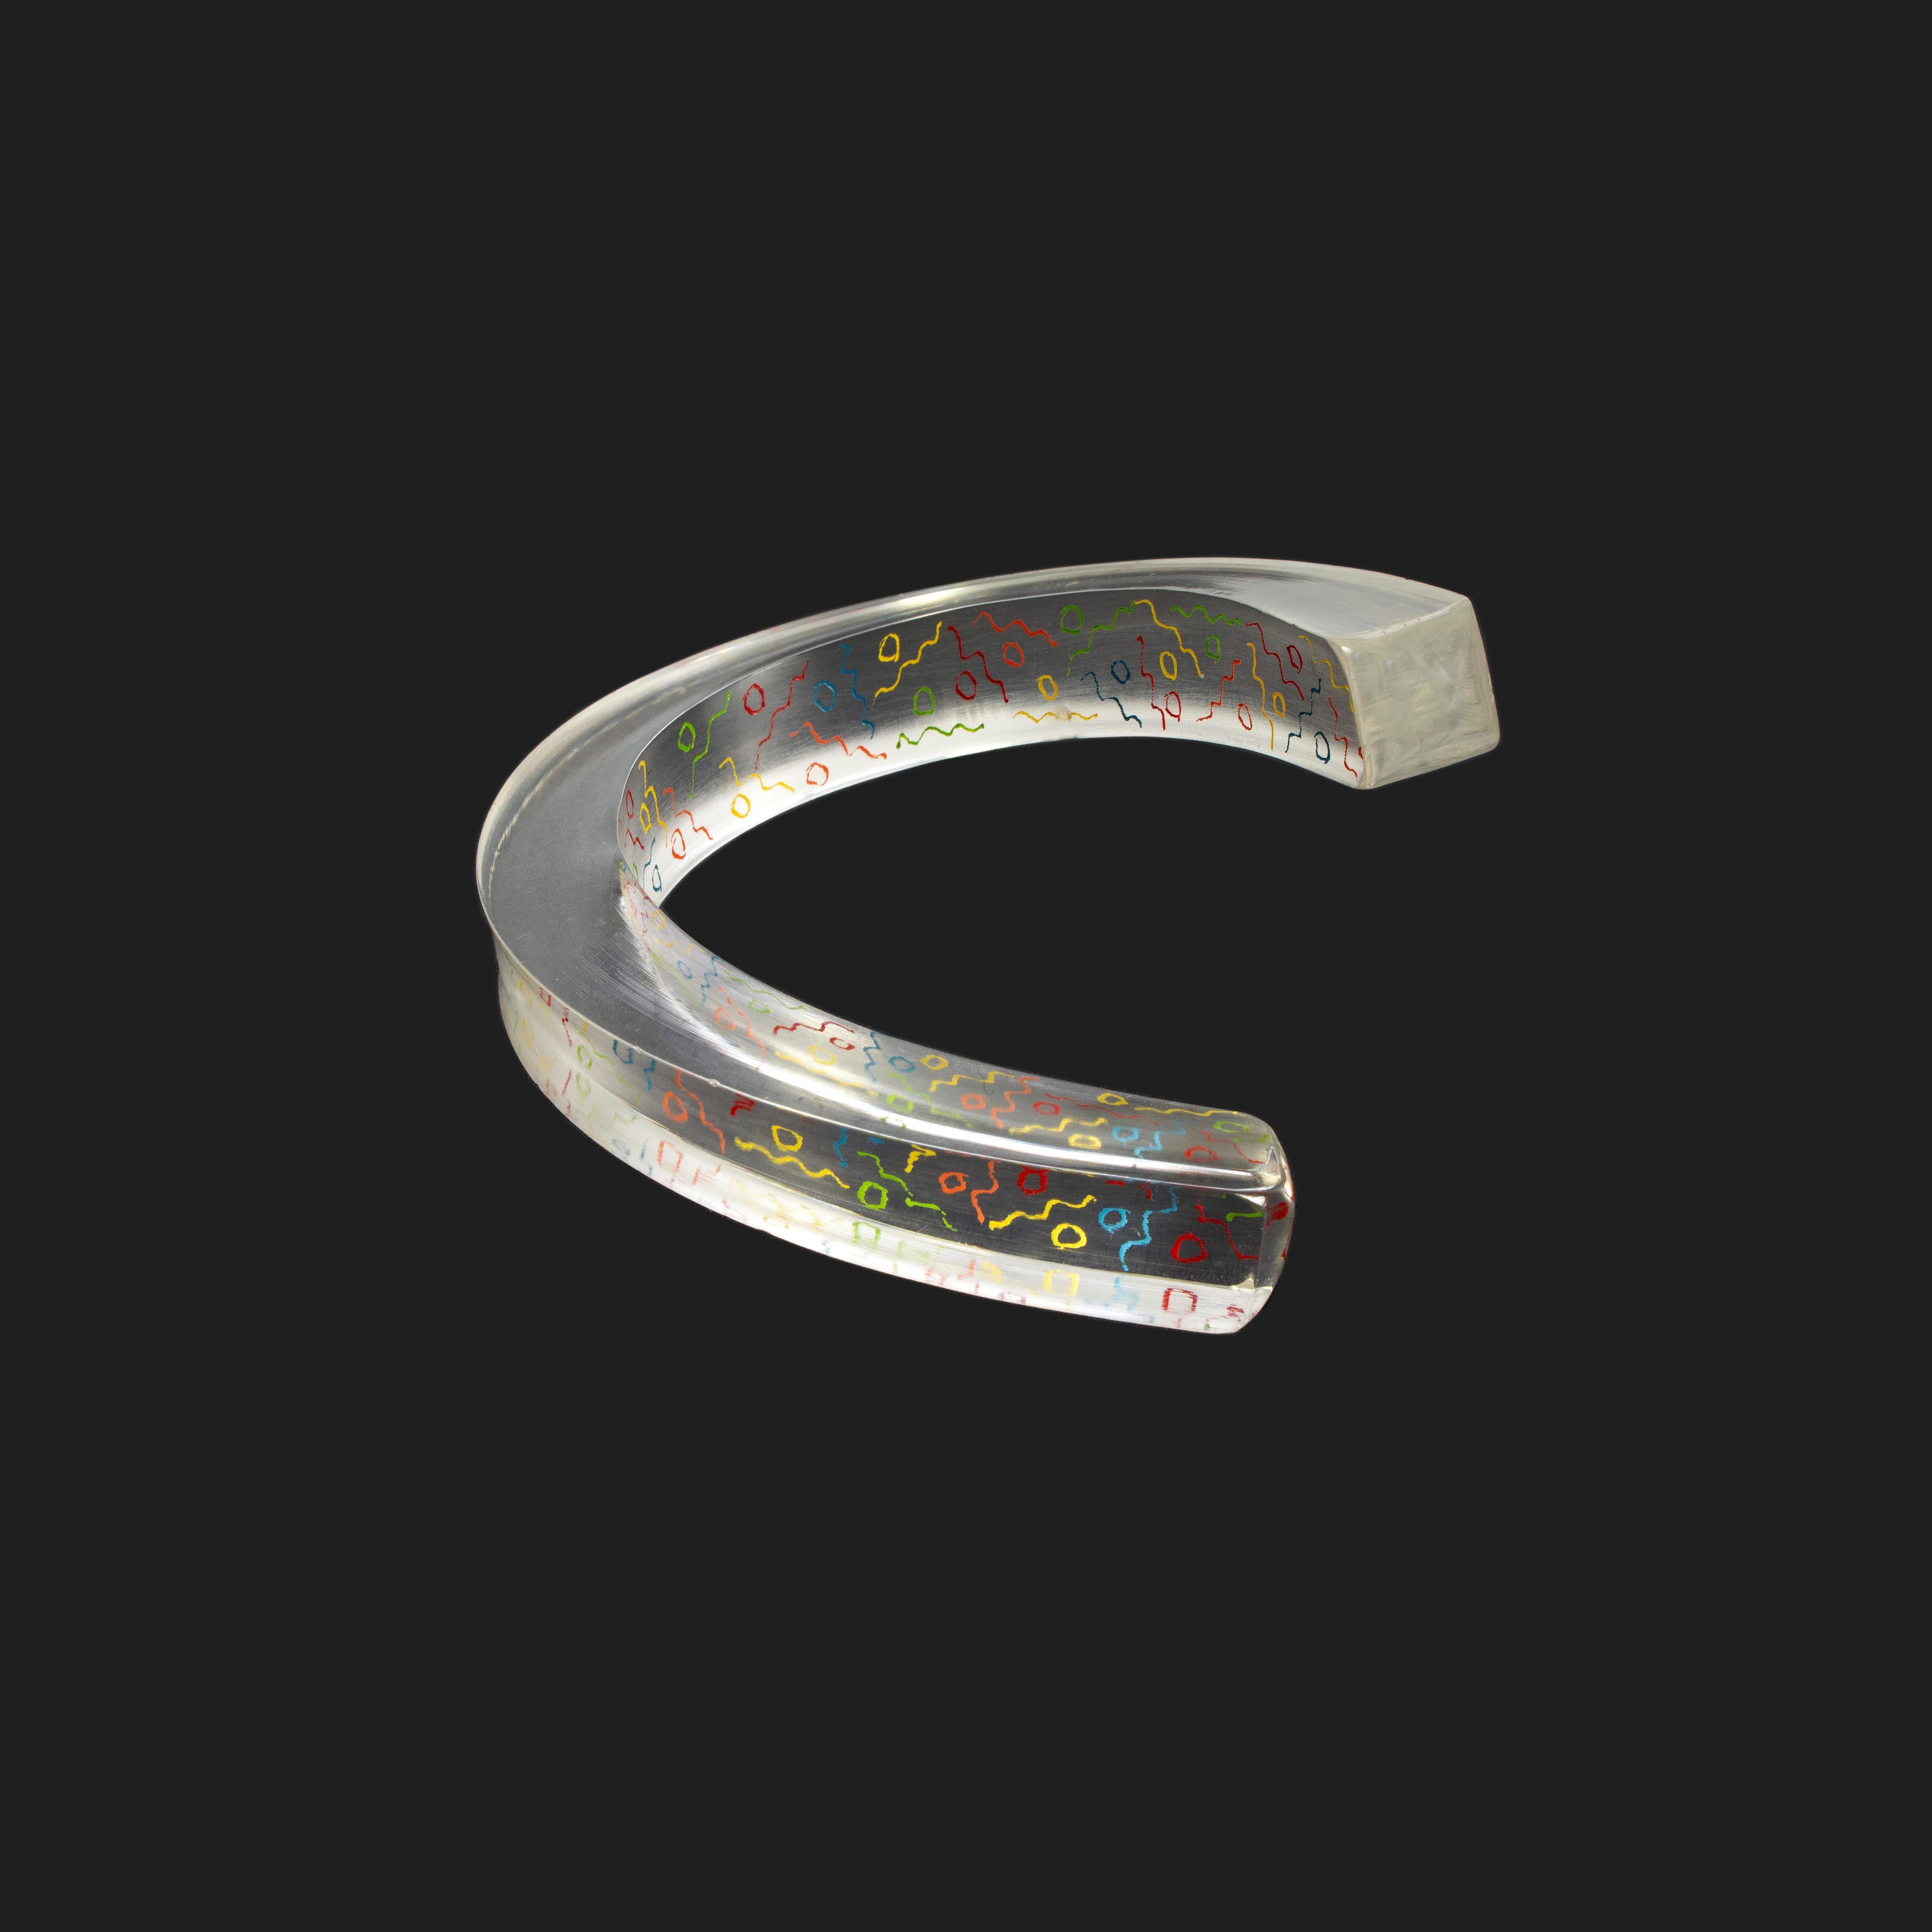 Product Details: 1980s Vintage - Bracelet - RARE - Clear Perspex + Multicoloured Geometric Inner Pattern - Asymmetric Shape -
Materials: Clear Perspex + Multicoloured Geometric Inner Pattern 
Depth: 1.2 cm
Length: 16 cm
Condition: Good Condition /